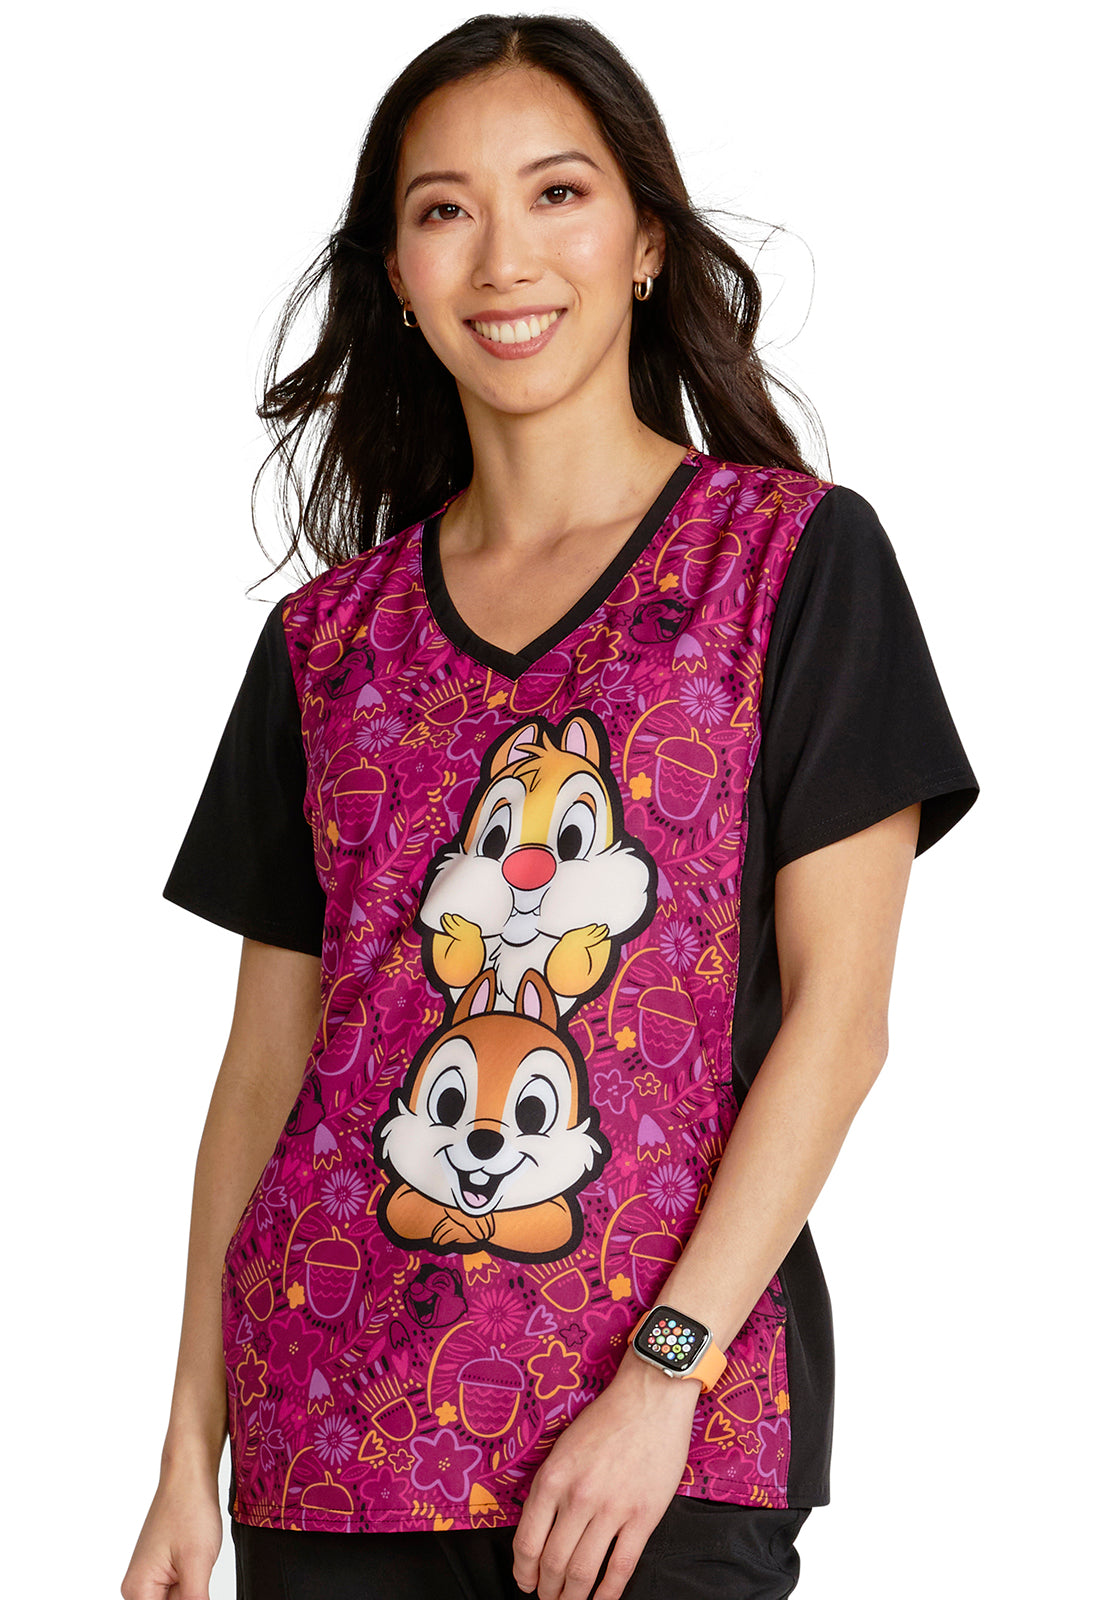 Disney V-Neck Print Top in Nuts For Nuts